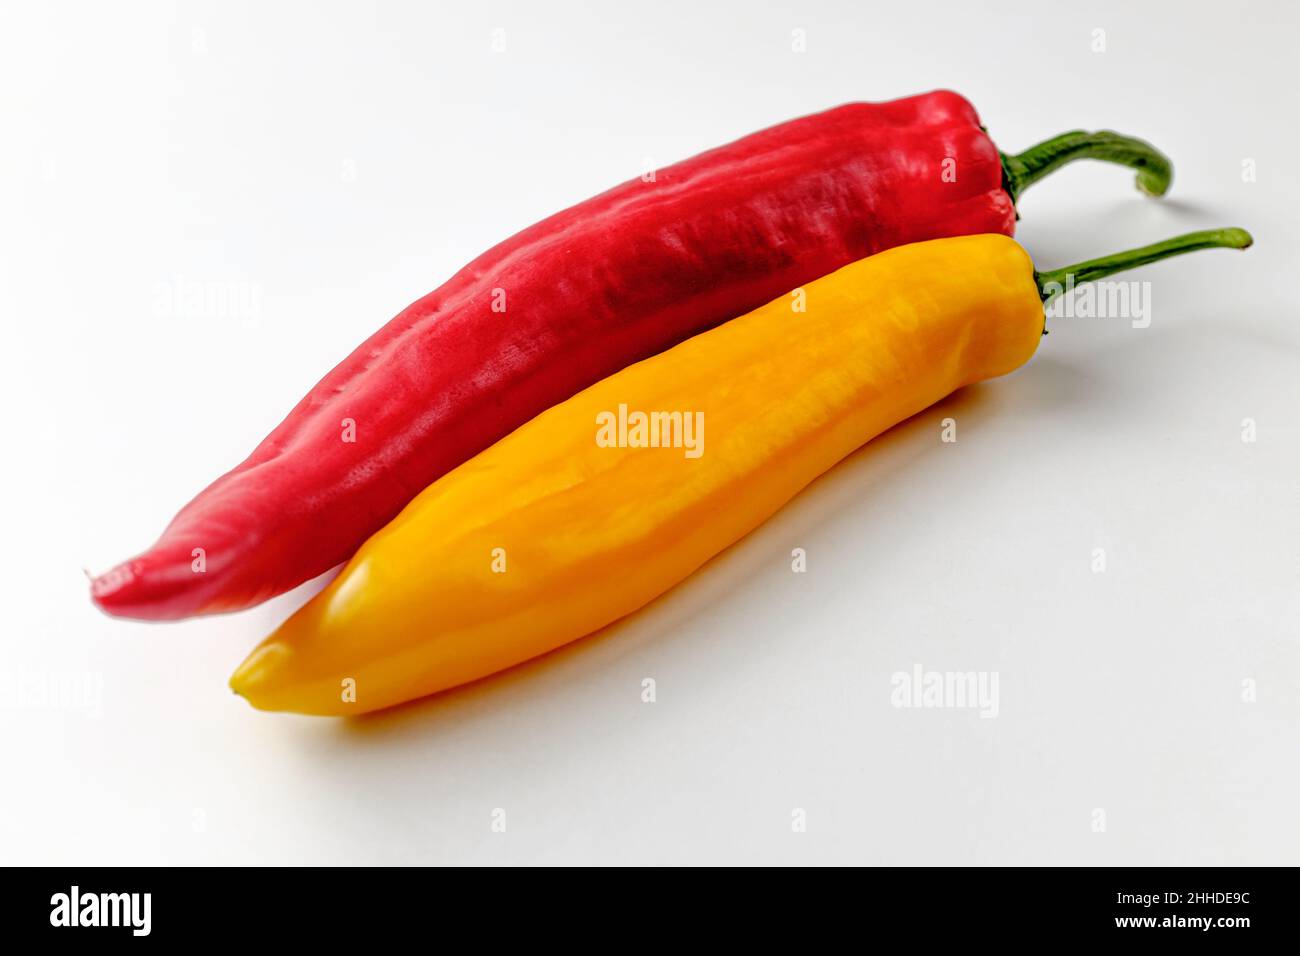 Vegetables with high sugar content. Vegetables with a crunchy texture. Pepper vegetables Stock Photo